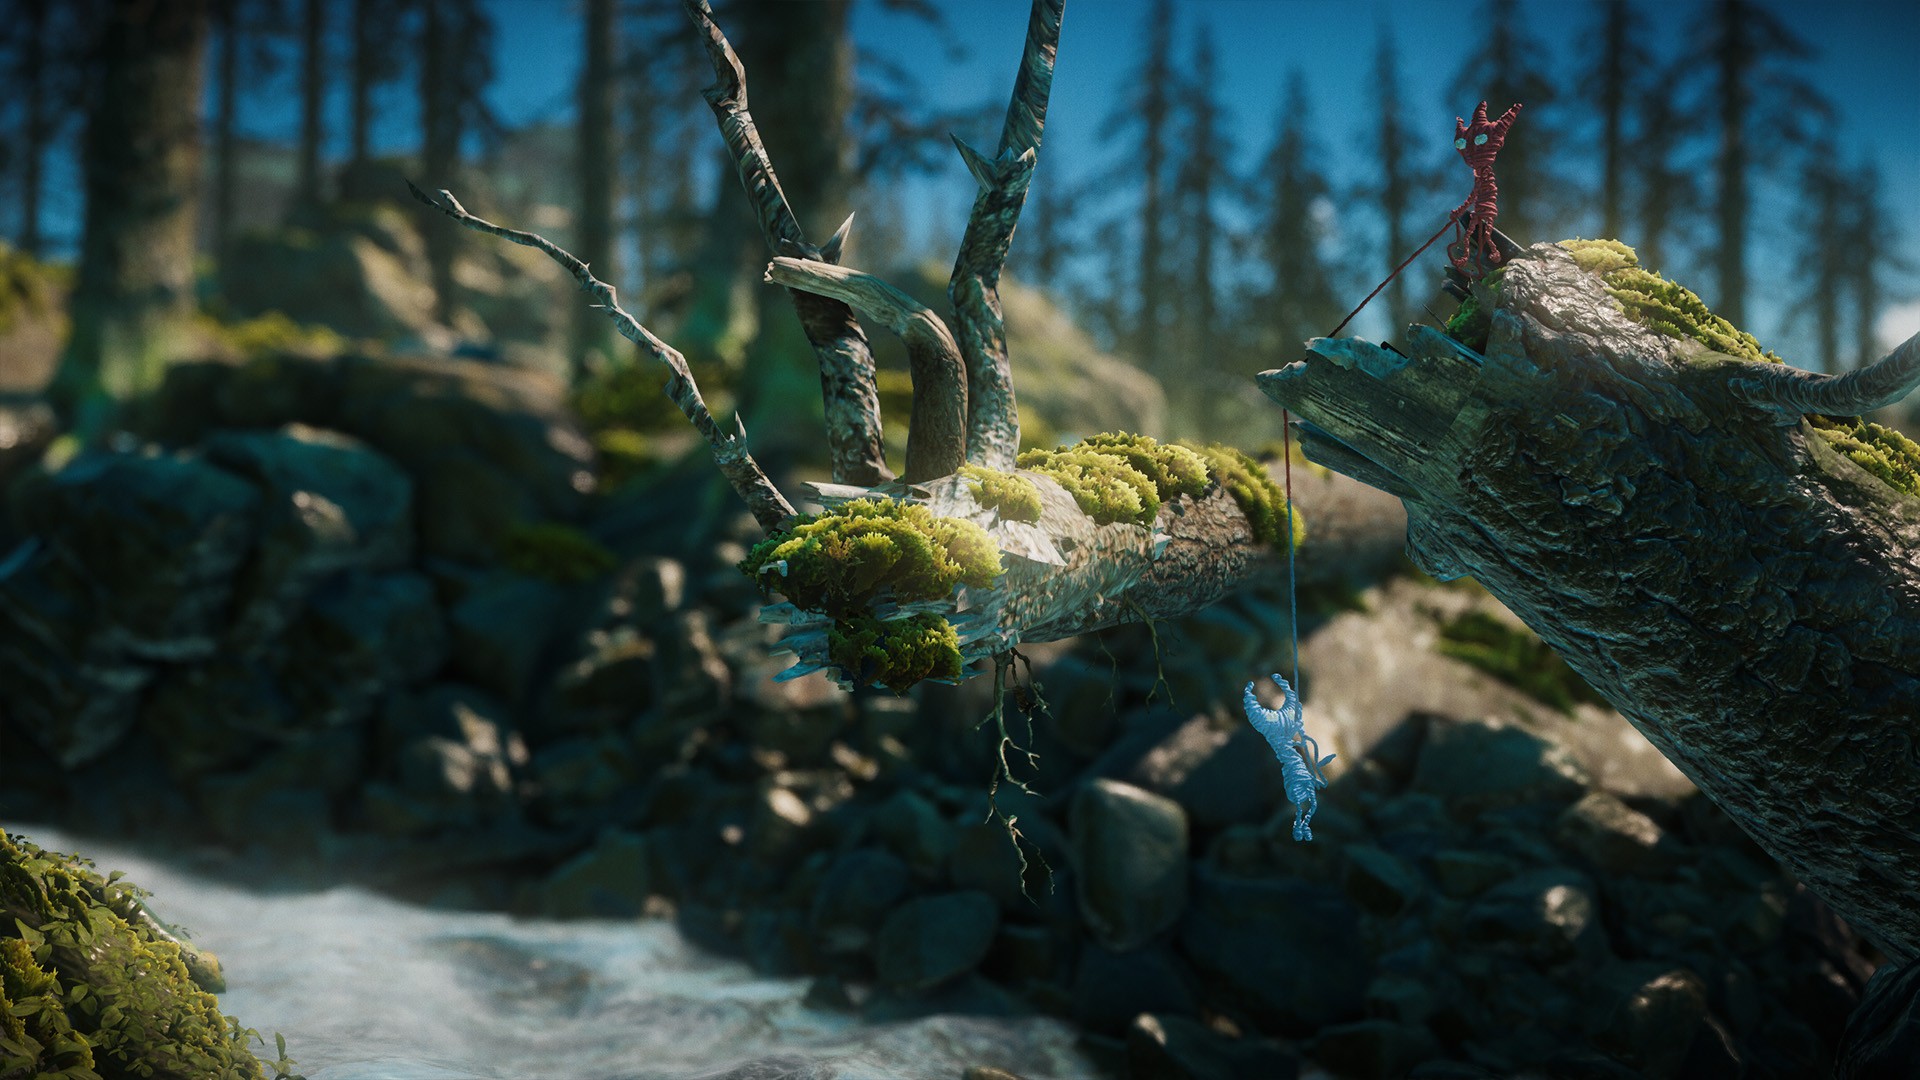 Unravel 2 is out today and it's a sweet, co-op platform adventure